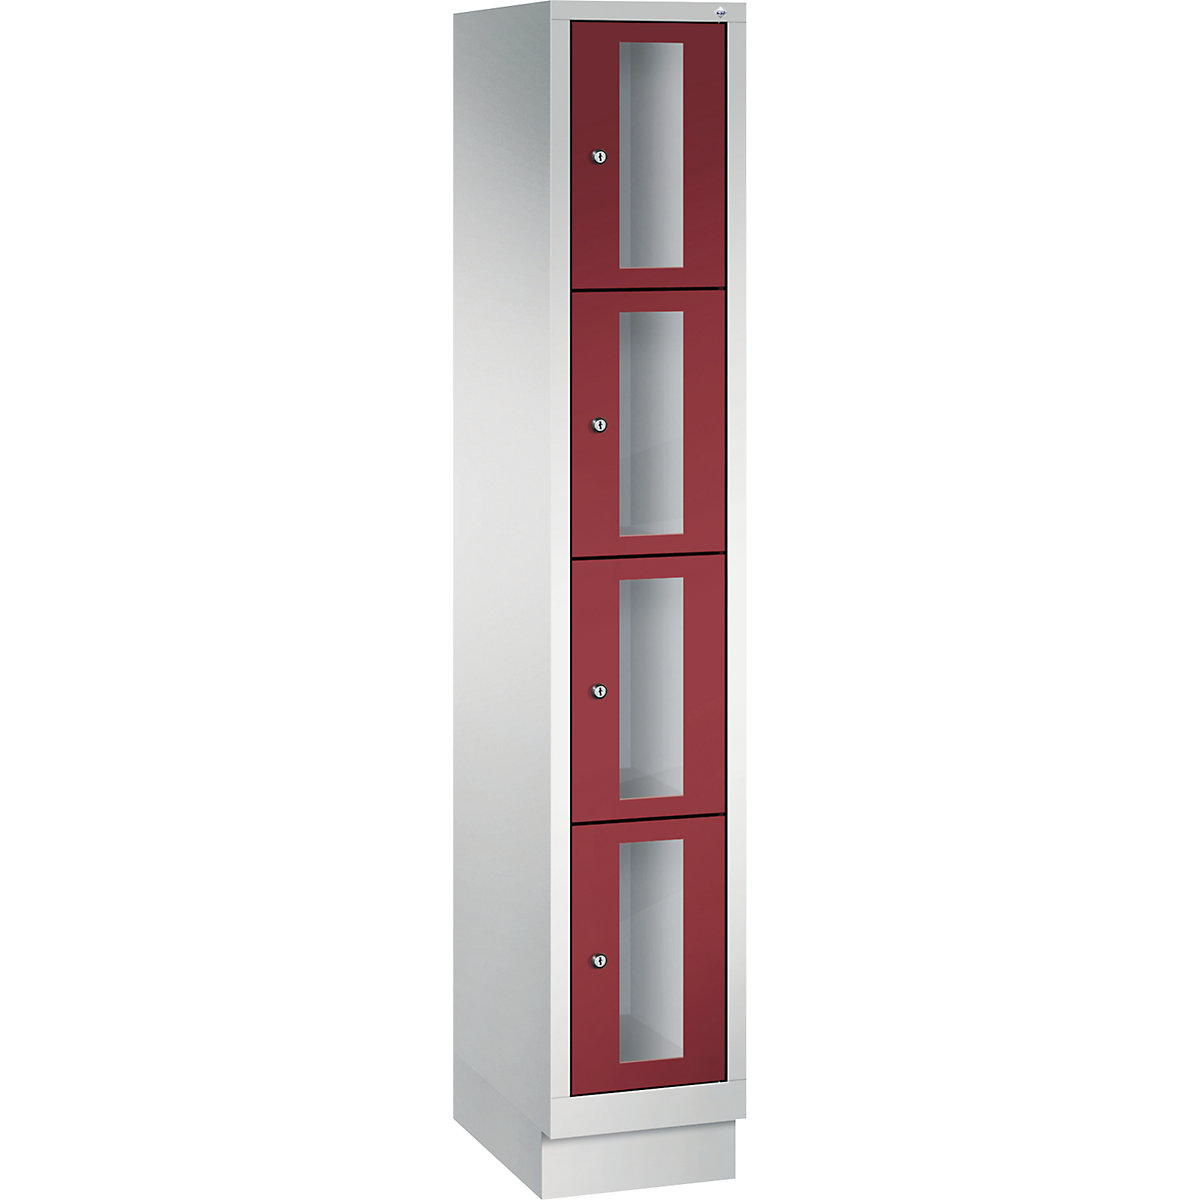 C+P – CLASSIC locker unit, compartment height 375 mm, with plinth, 4 compartments, width 320 mm, ruby red door